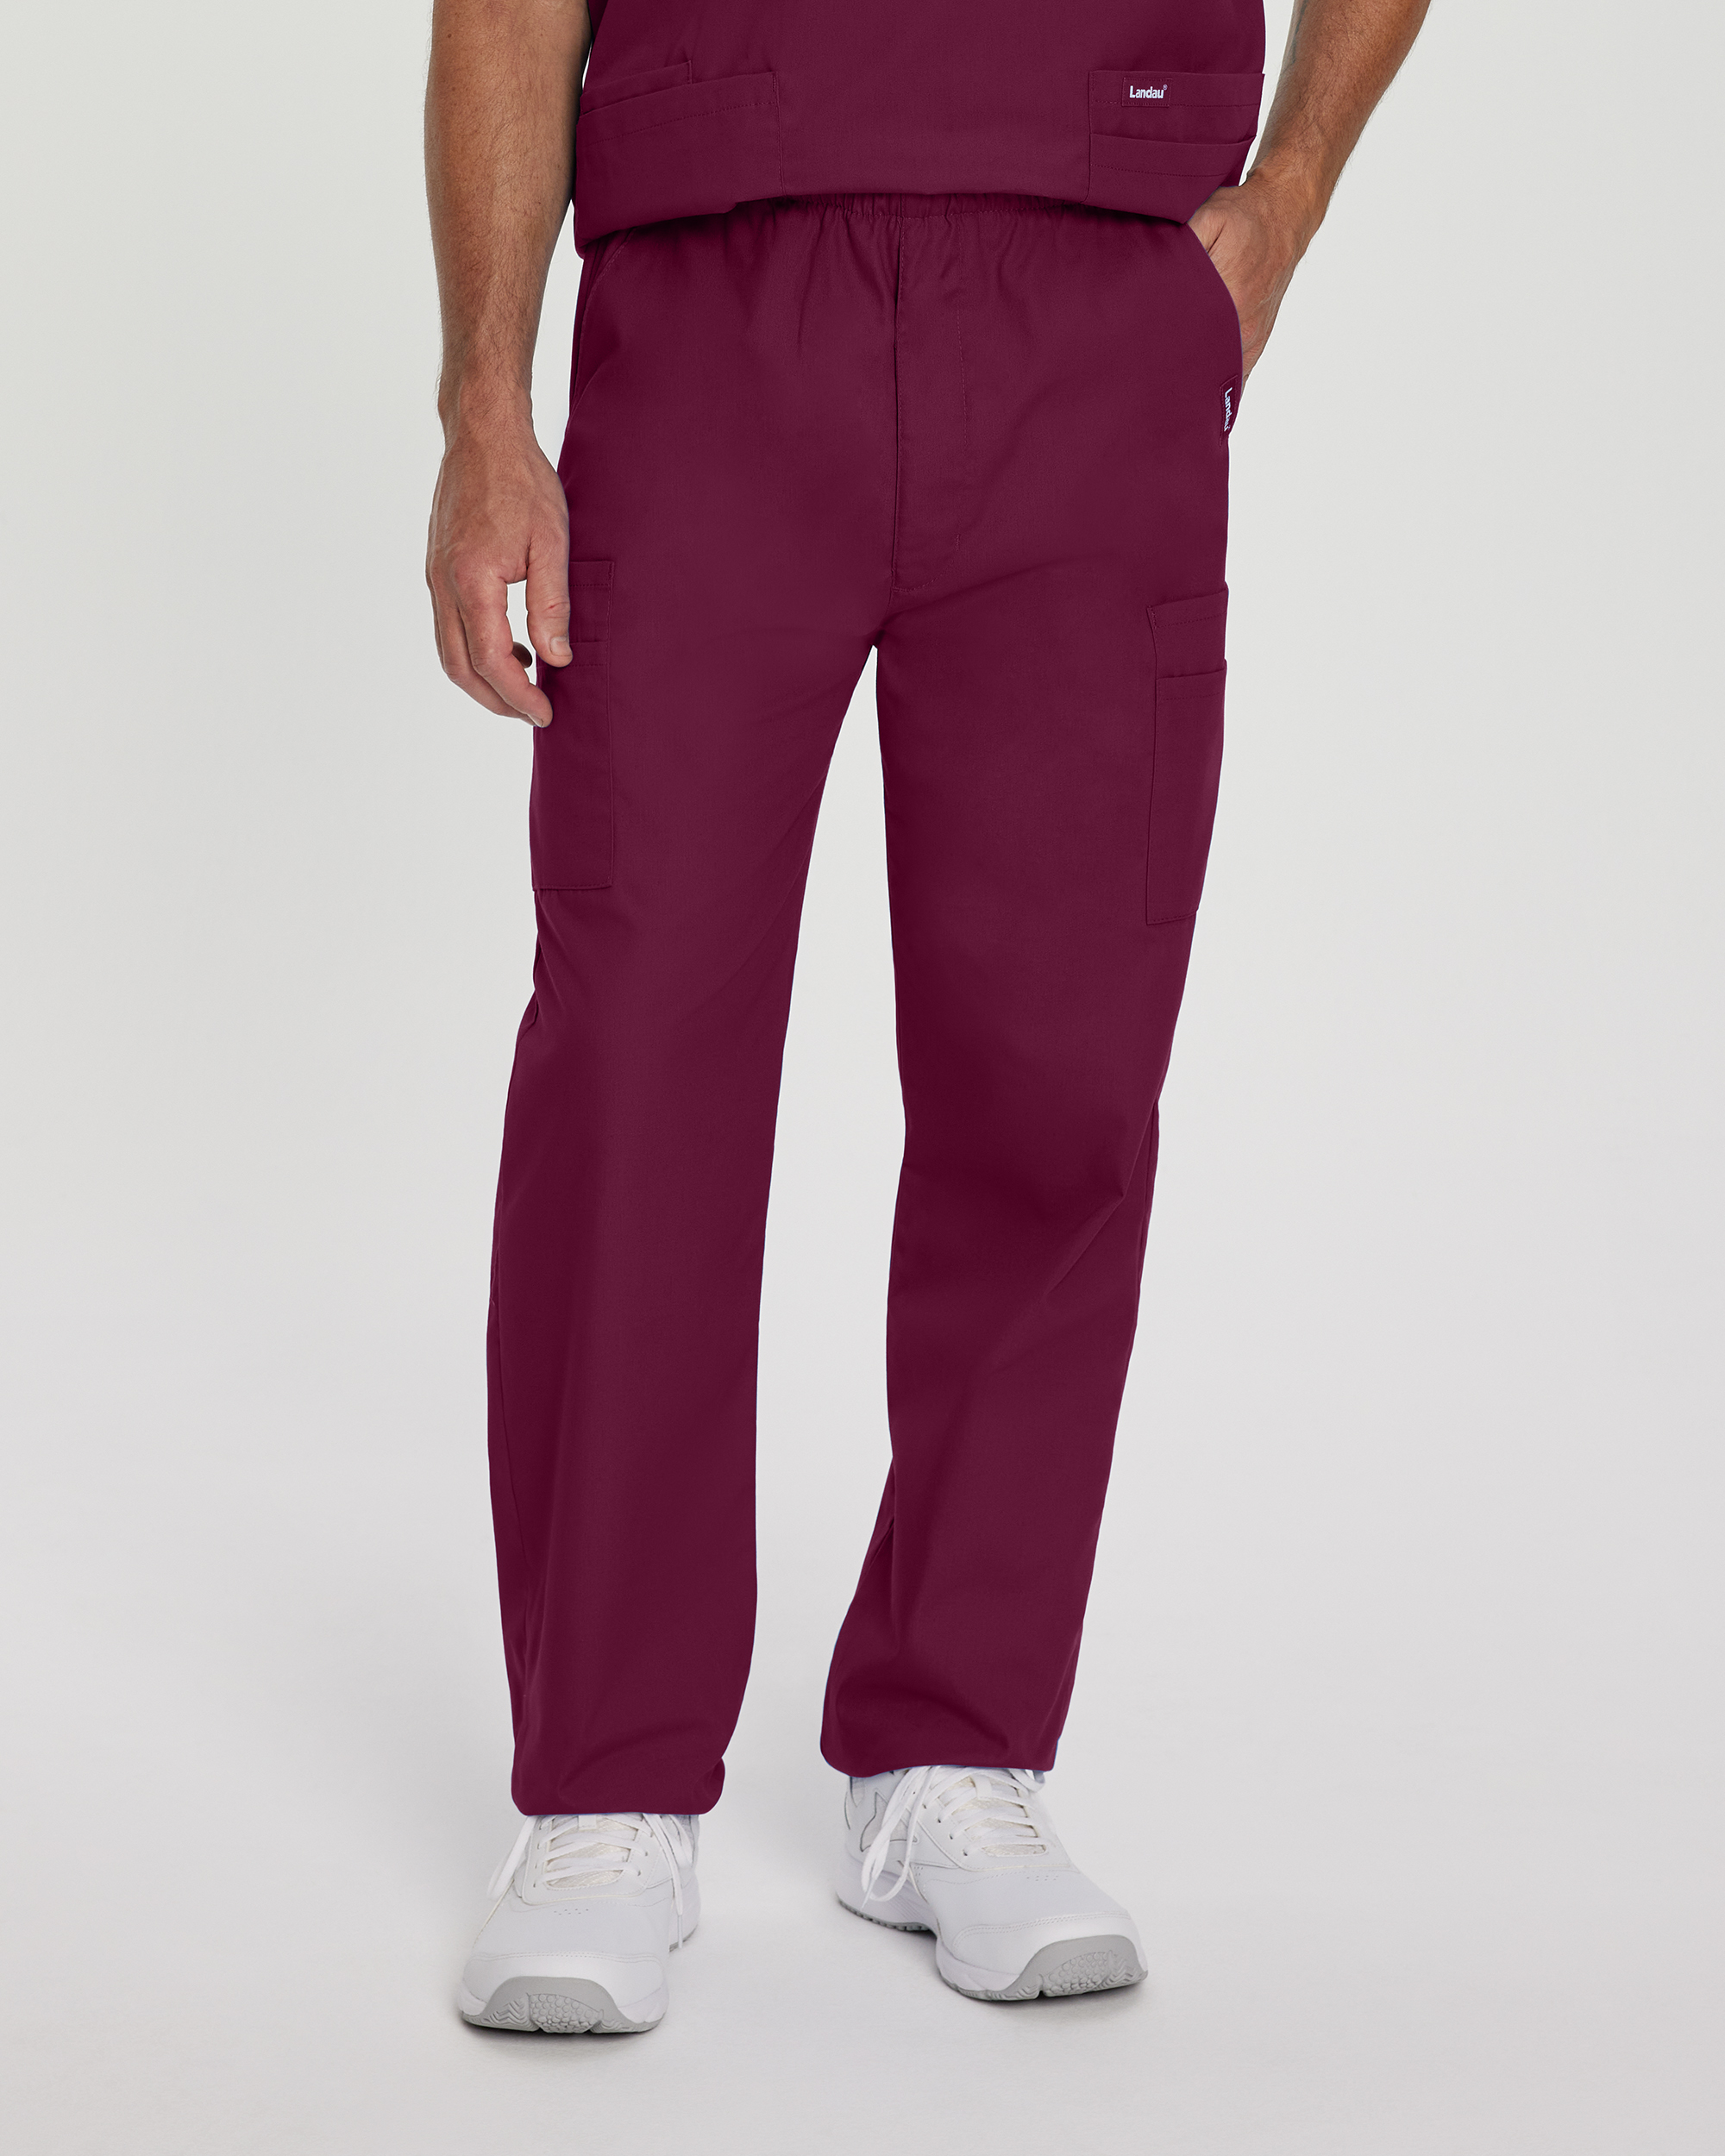 How many pockets do these cargo scrub pants have and what are their types?